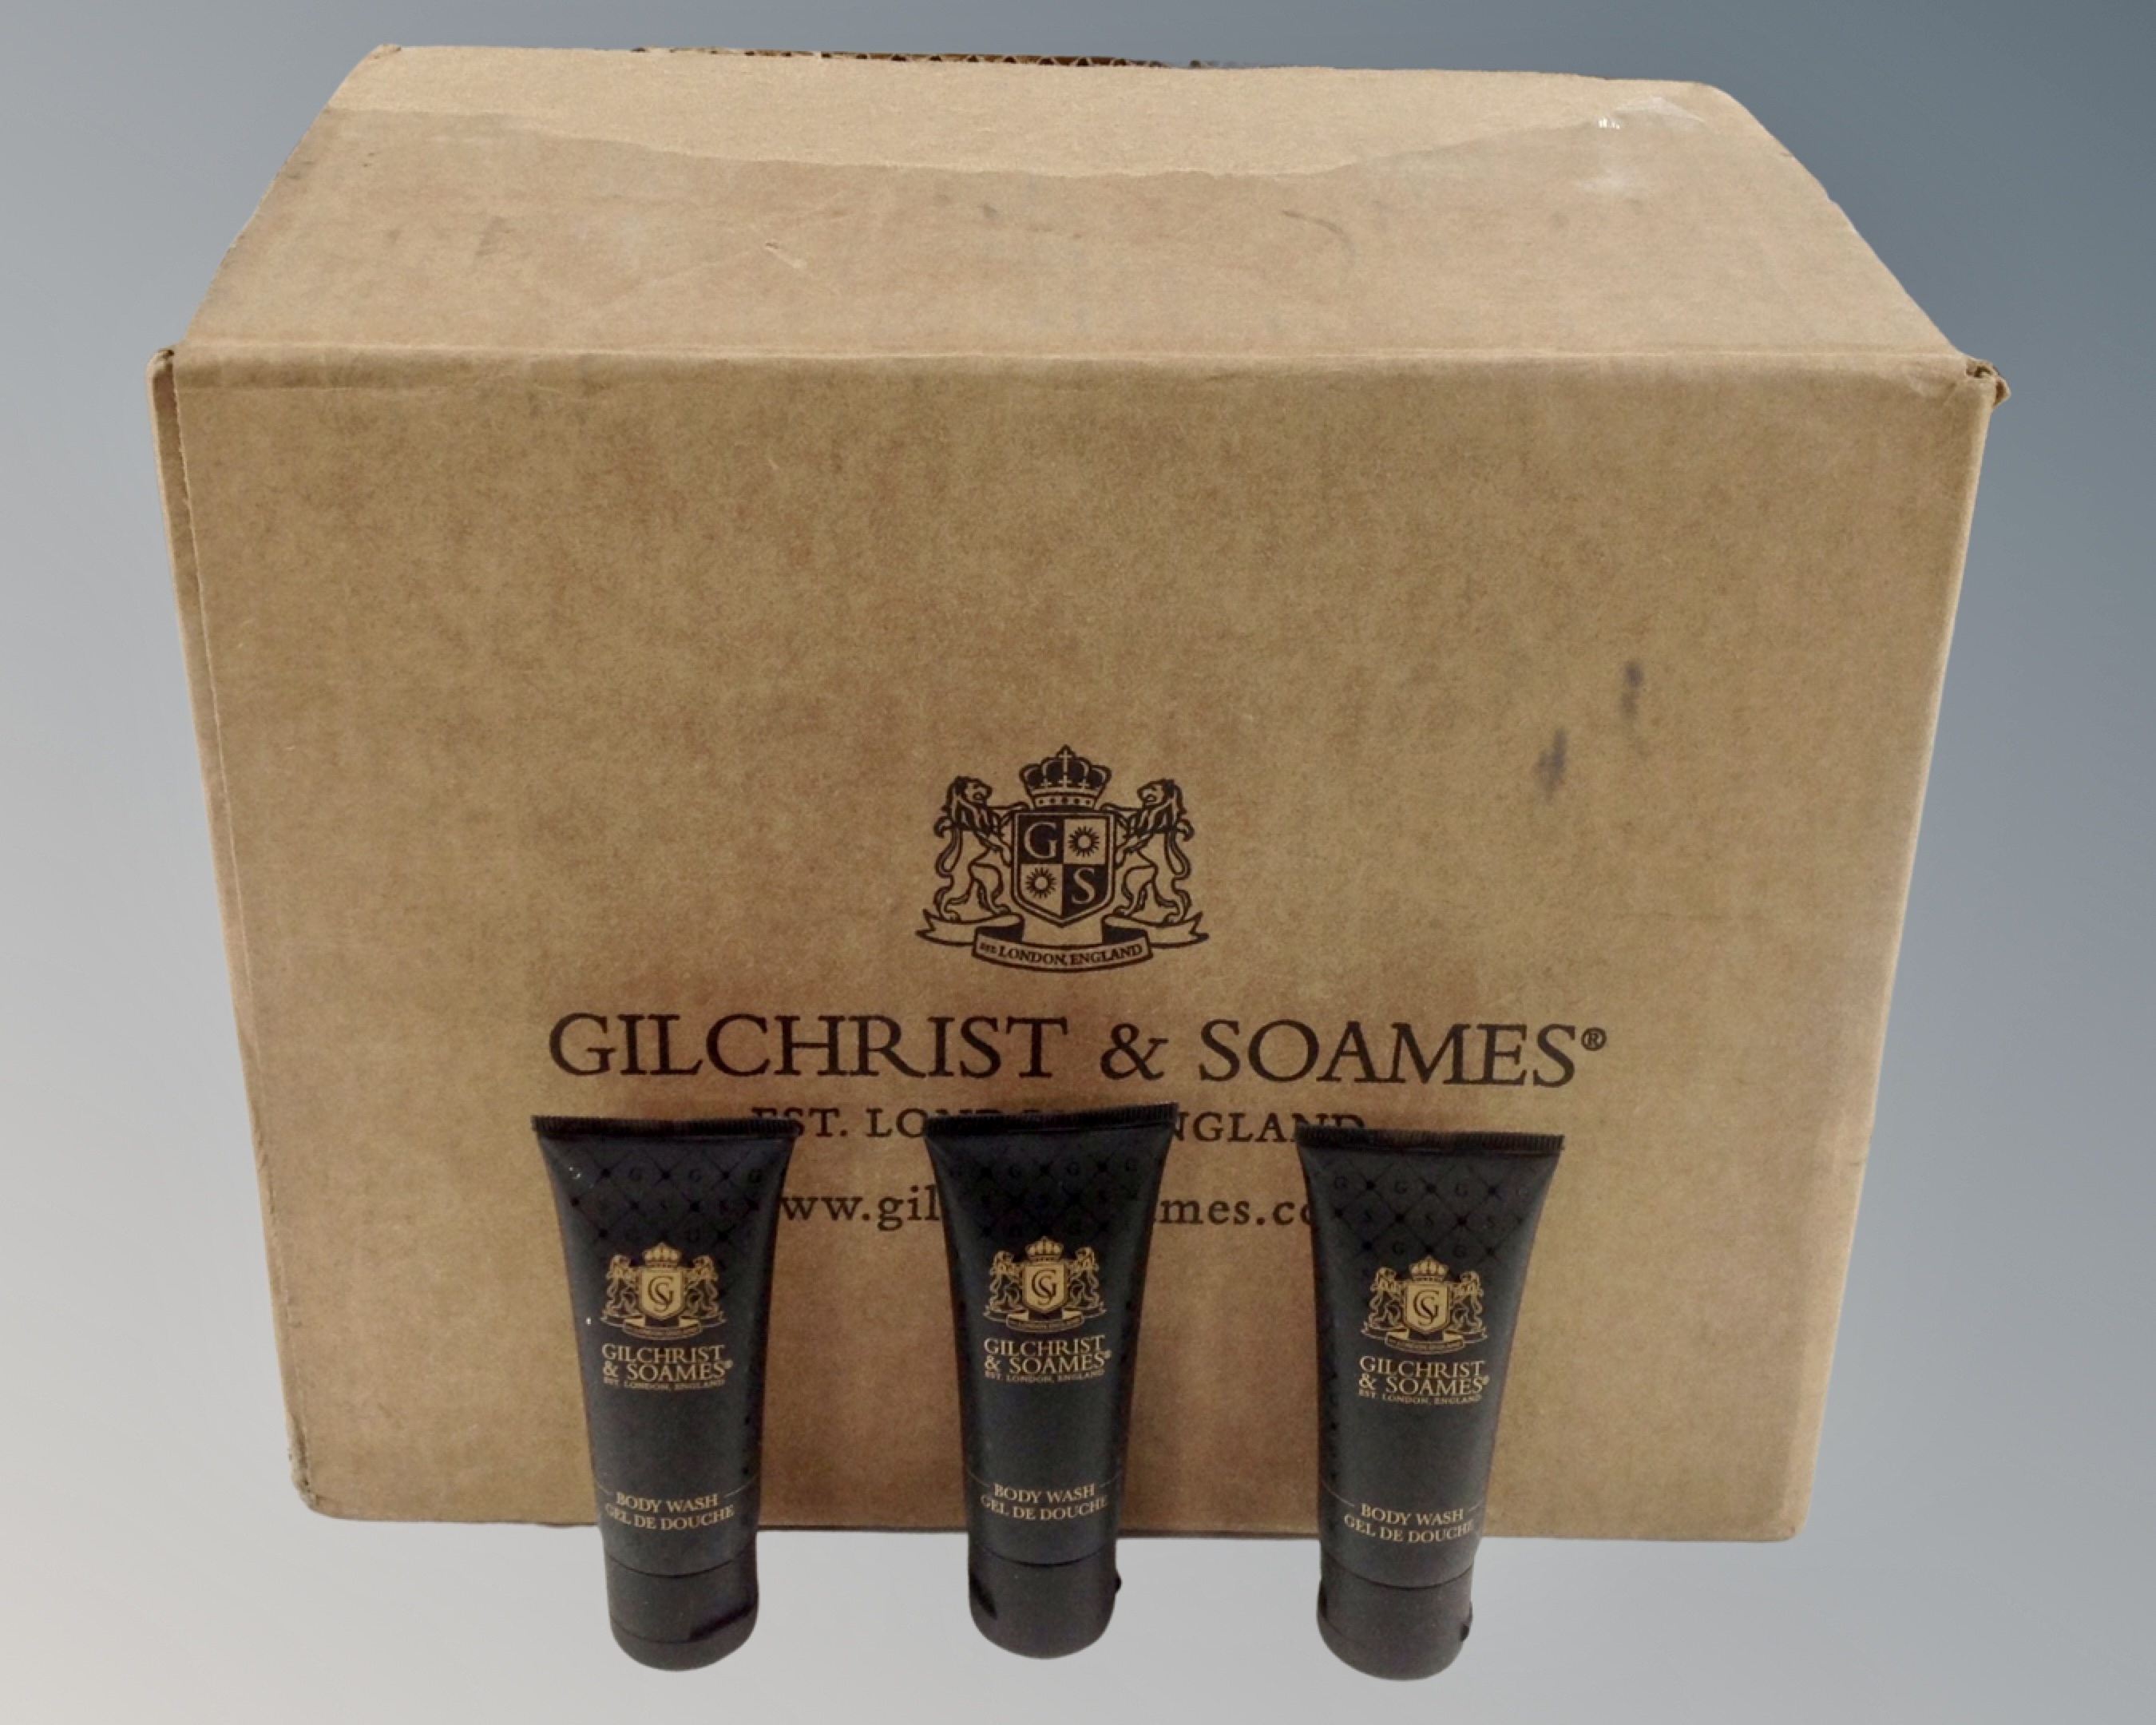 A box containing Gilchrist and Soames bodywash.